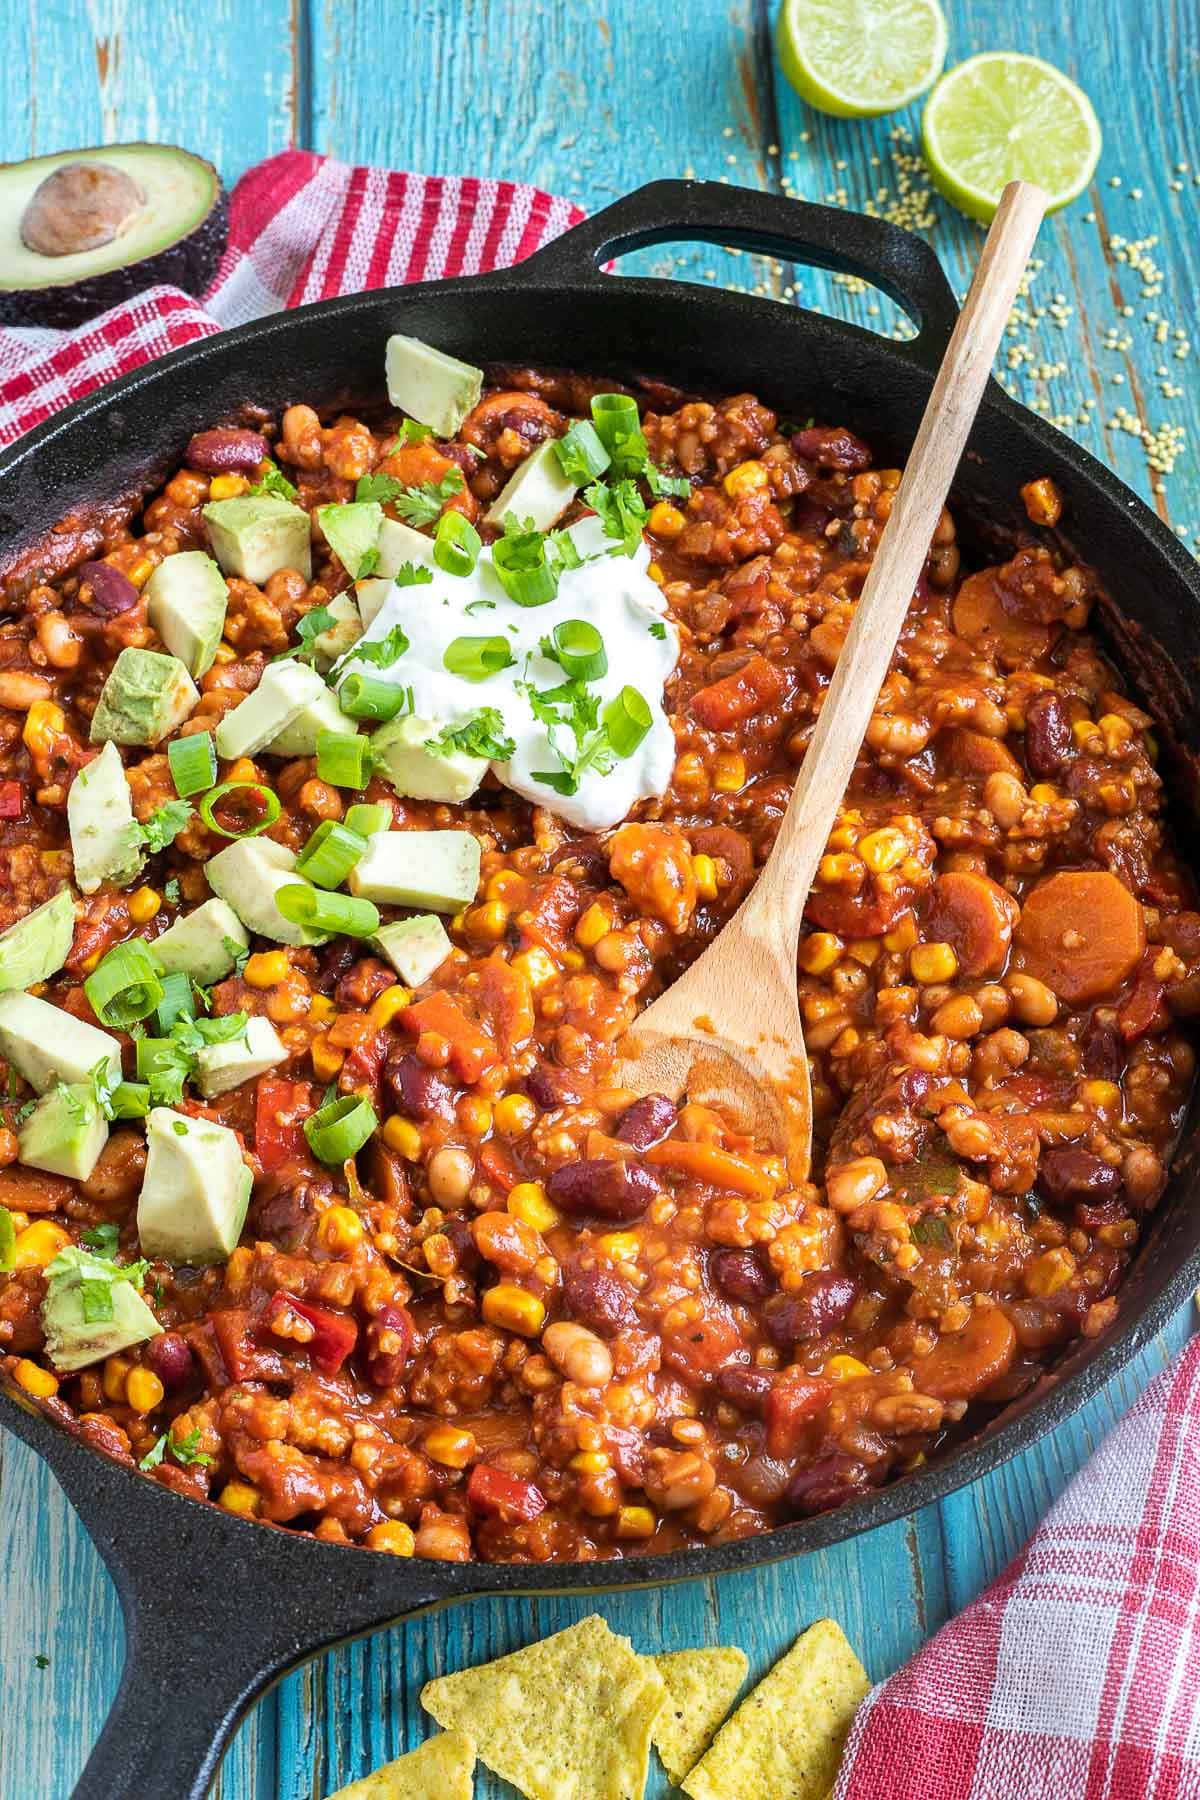 Cast iron skillet with a chunky chili loaded with chopped vegetables and beans, topped with white cream, chopped avocado, and scallion. A wooden spatula is placed in the middle.